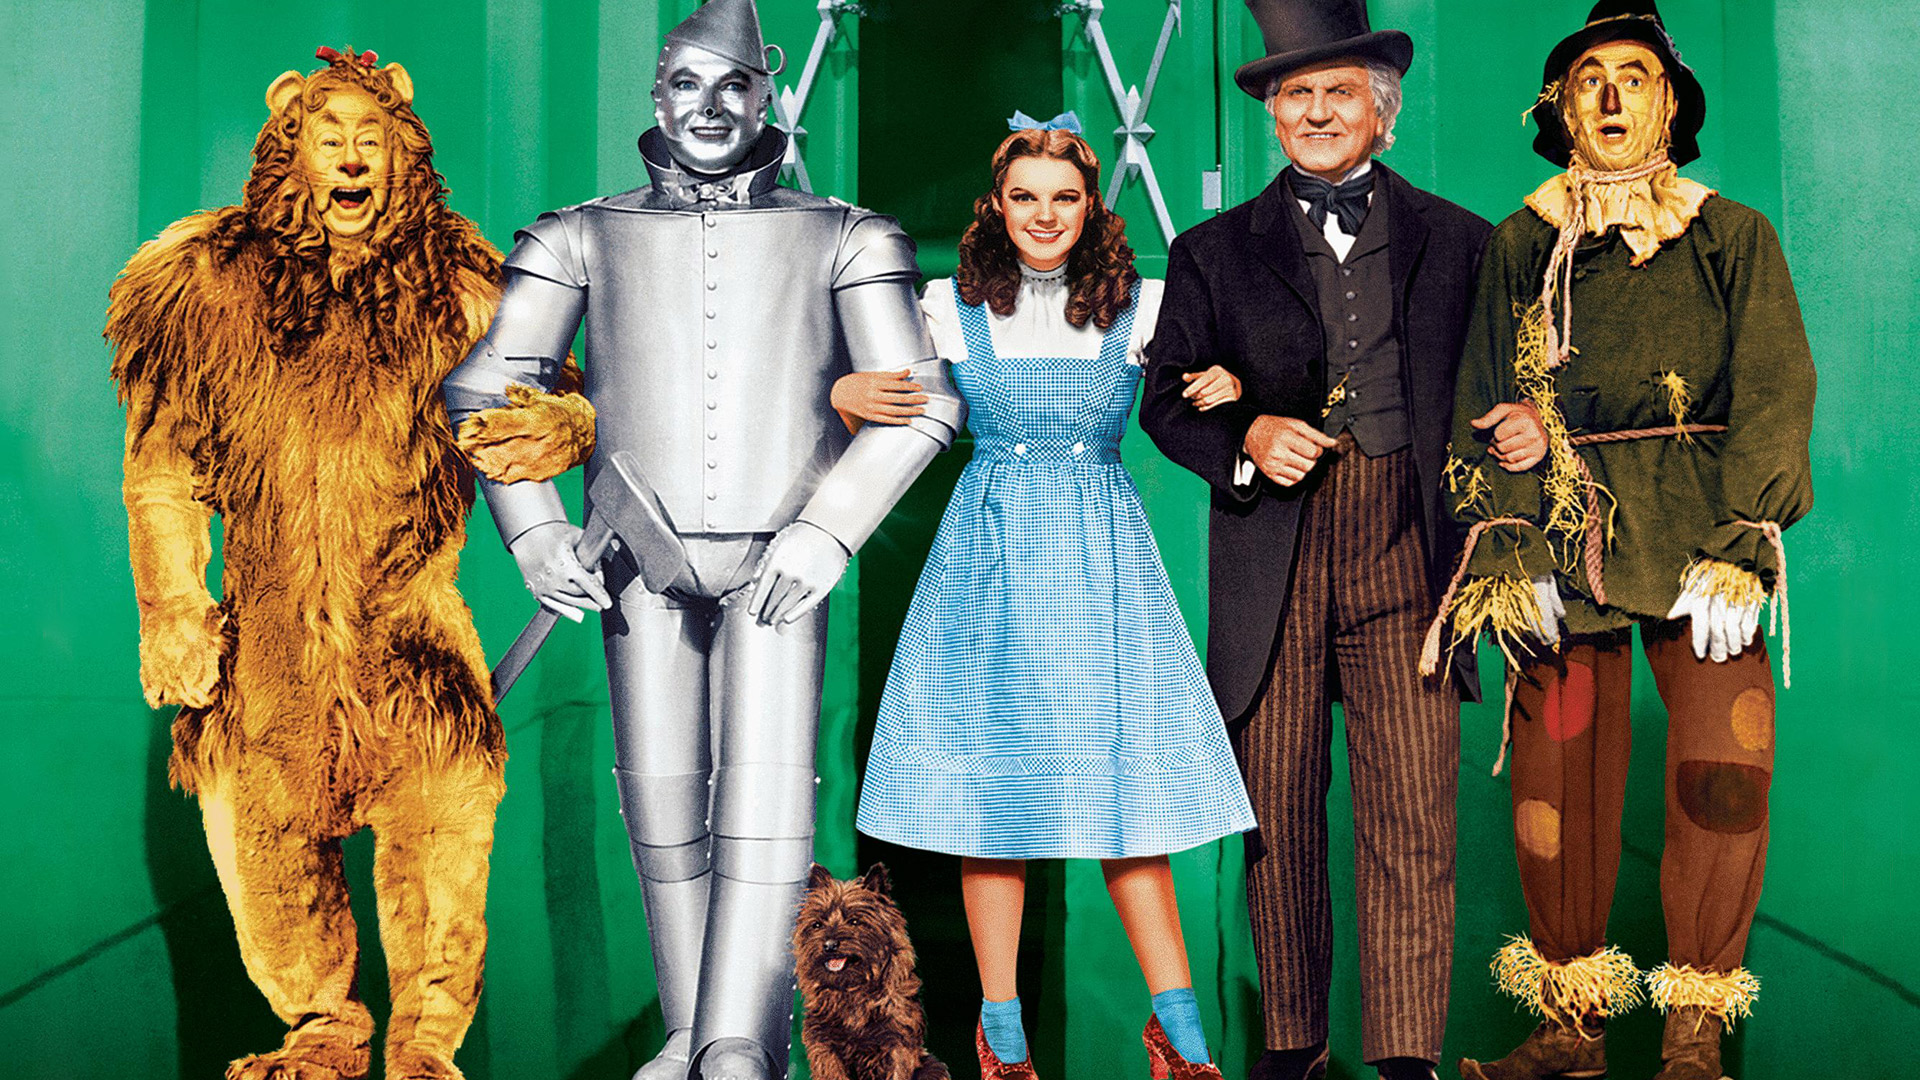 The Wizard Of Oz wallpapers.